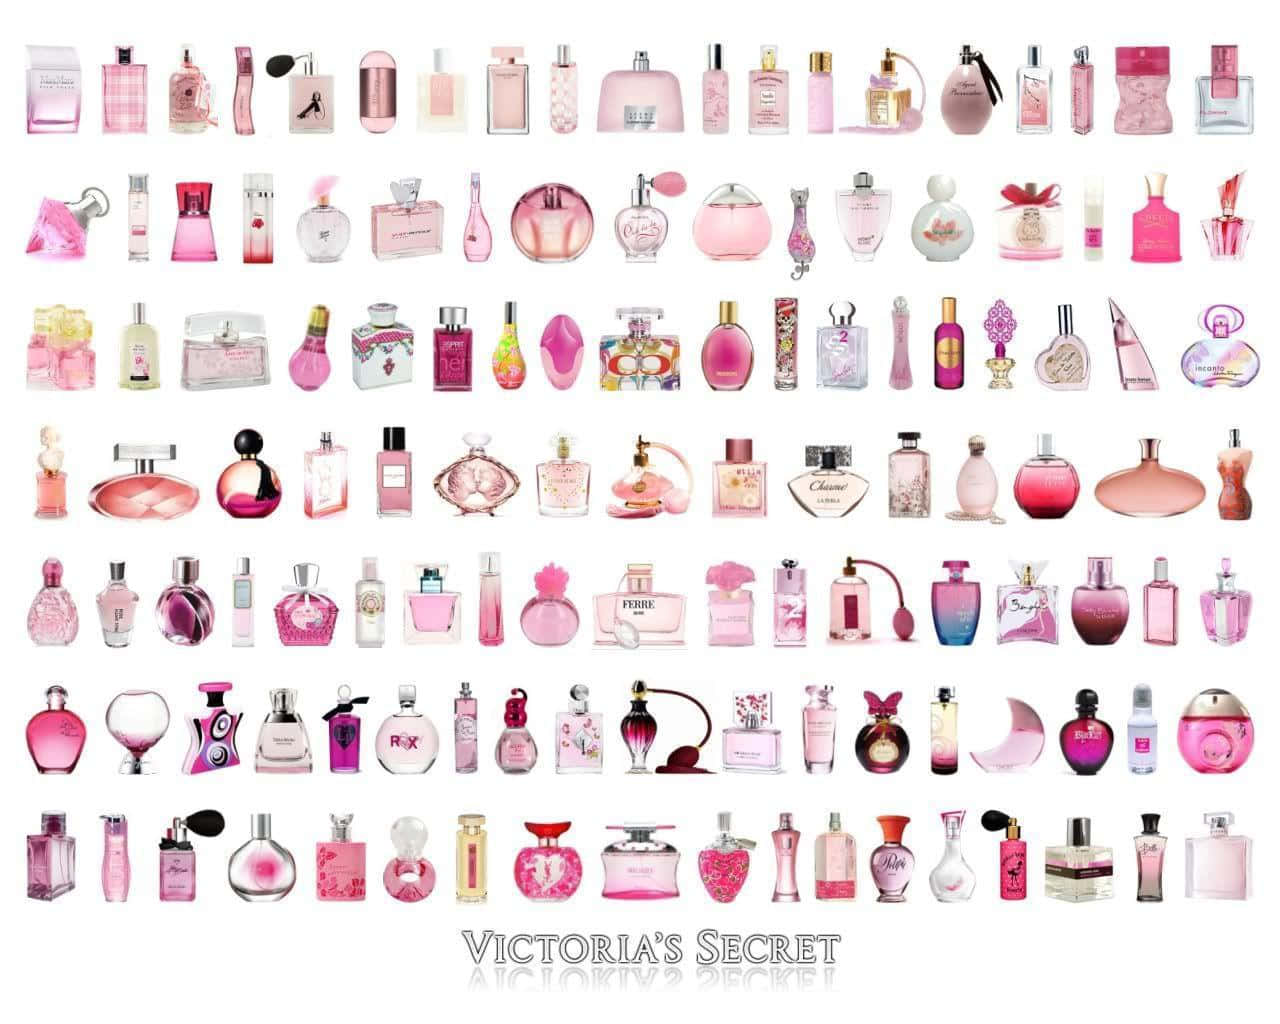 Victoria's Secret Angels showcasing the latest collection